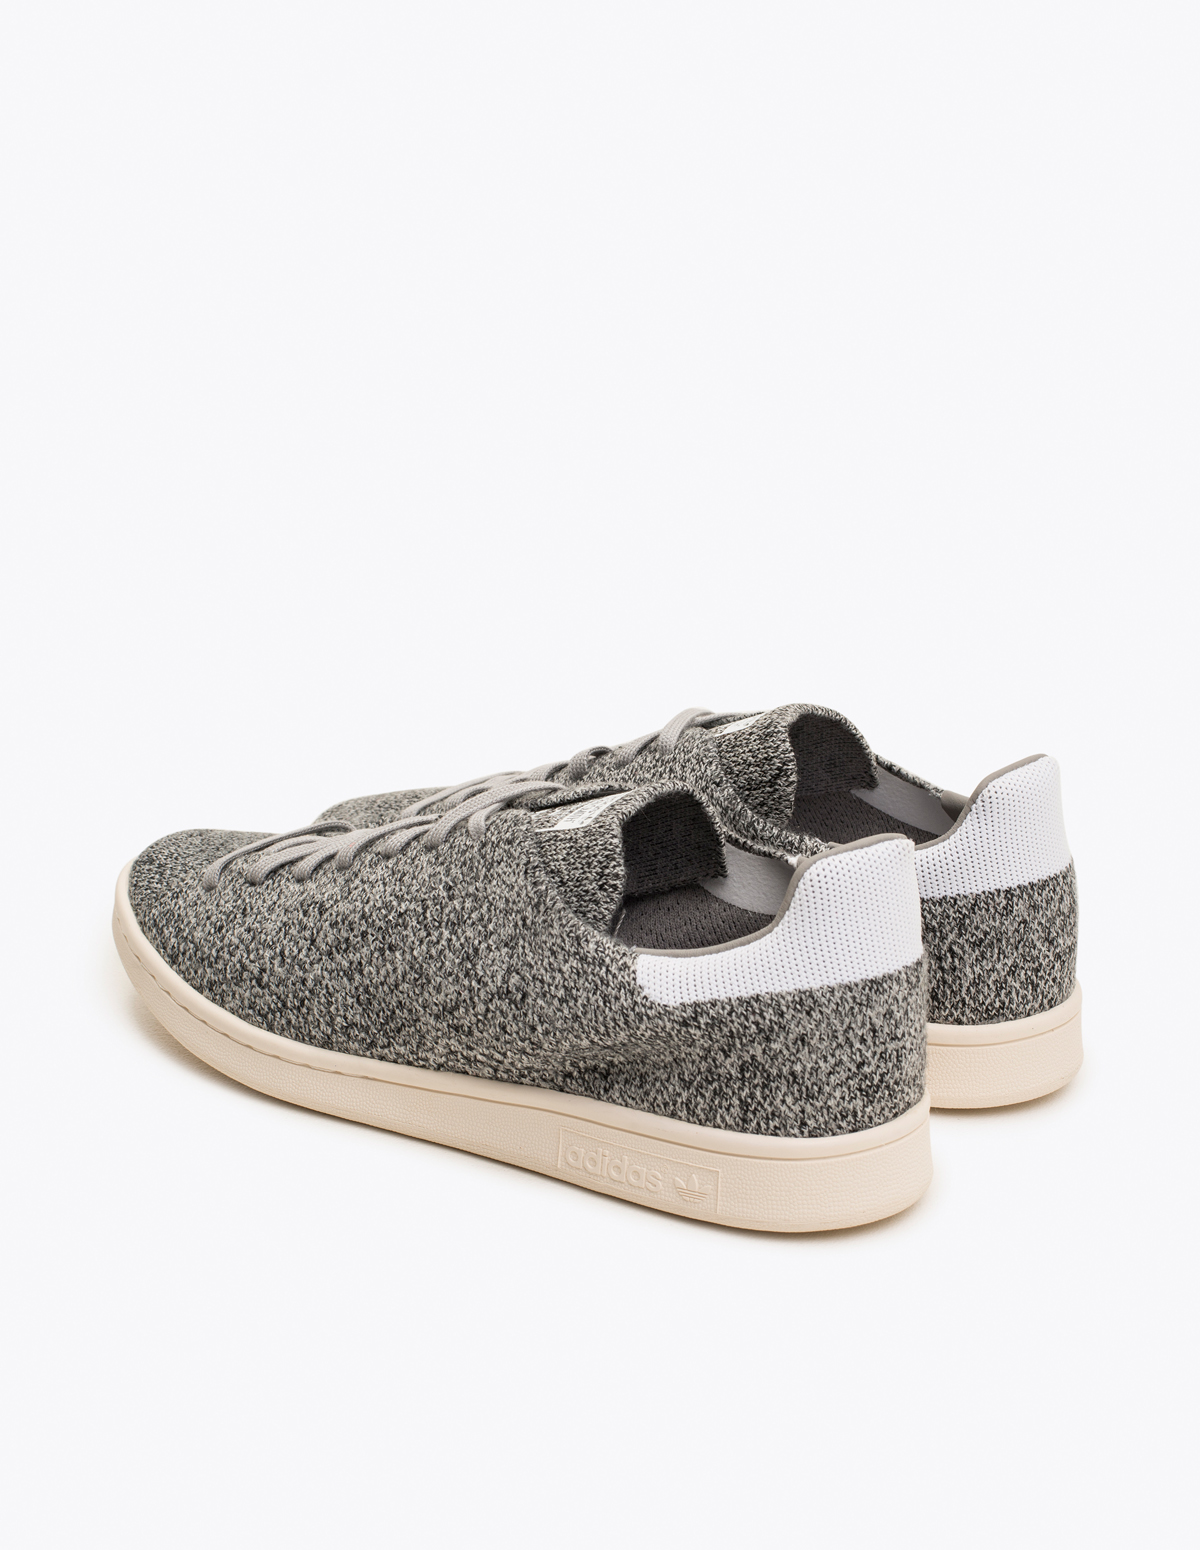 Knit One, Purl Two Forever: Adidas Originals Stan Smith PK Multi Grey ...